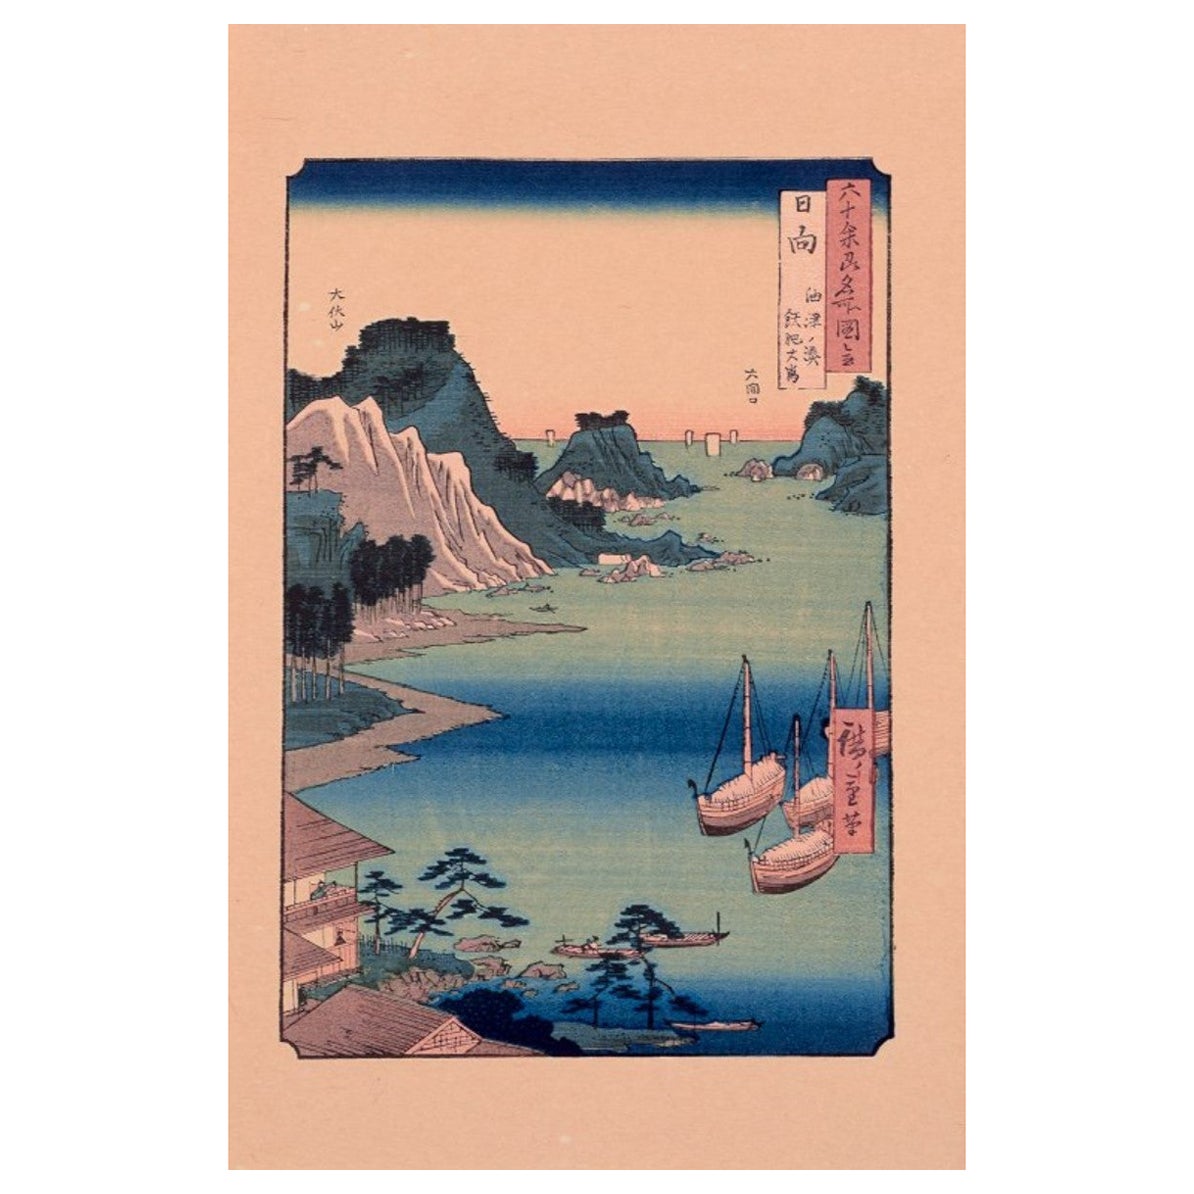 Ando Hiroshige, Japanese woodblock print on paper. Province of Hyuga.  For Sale